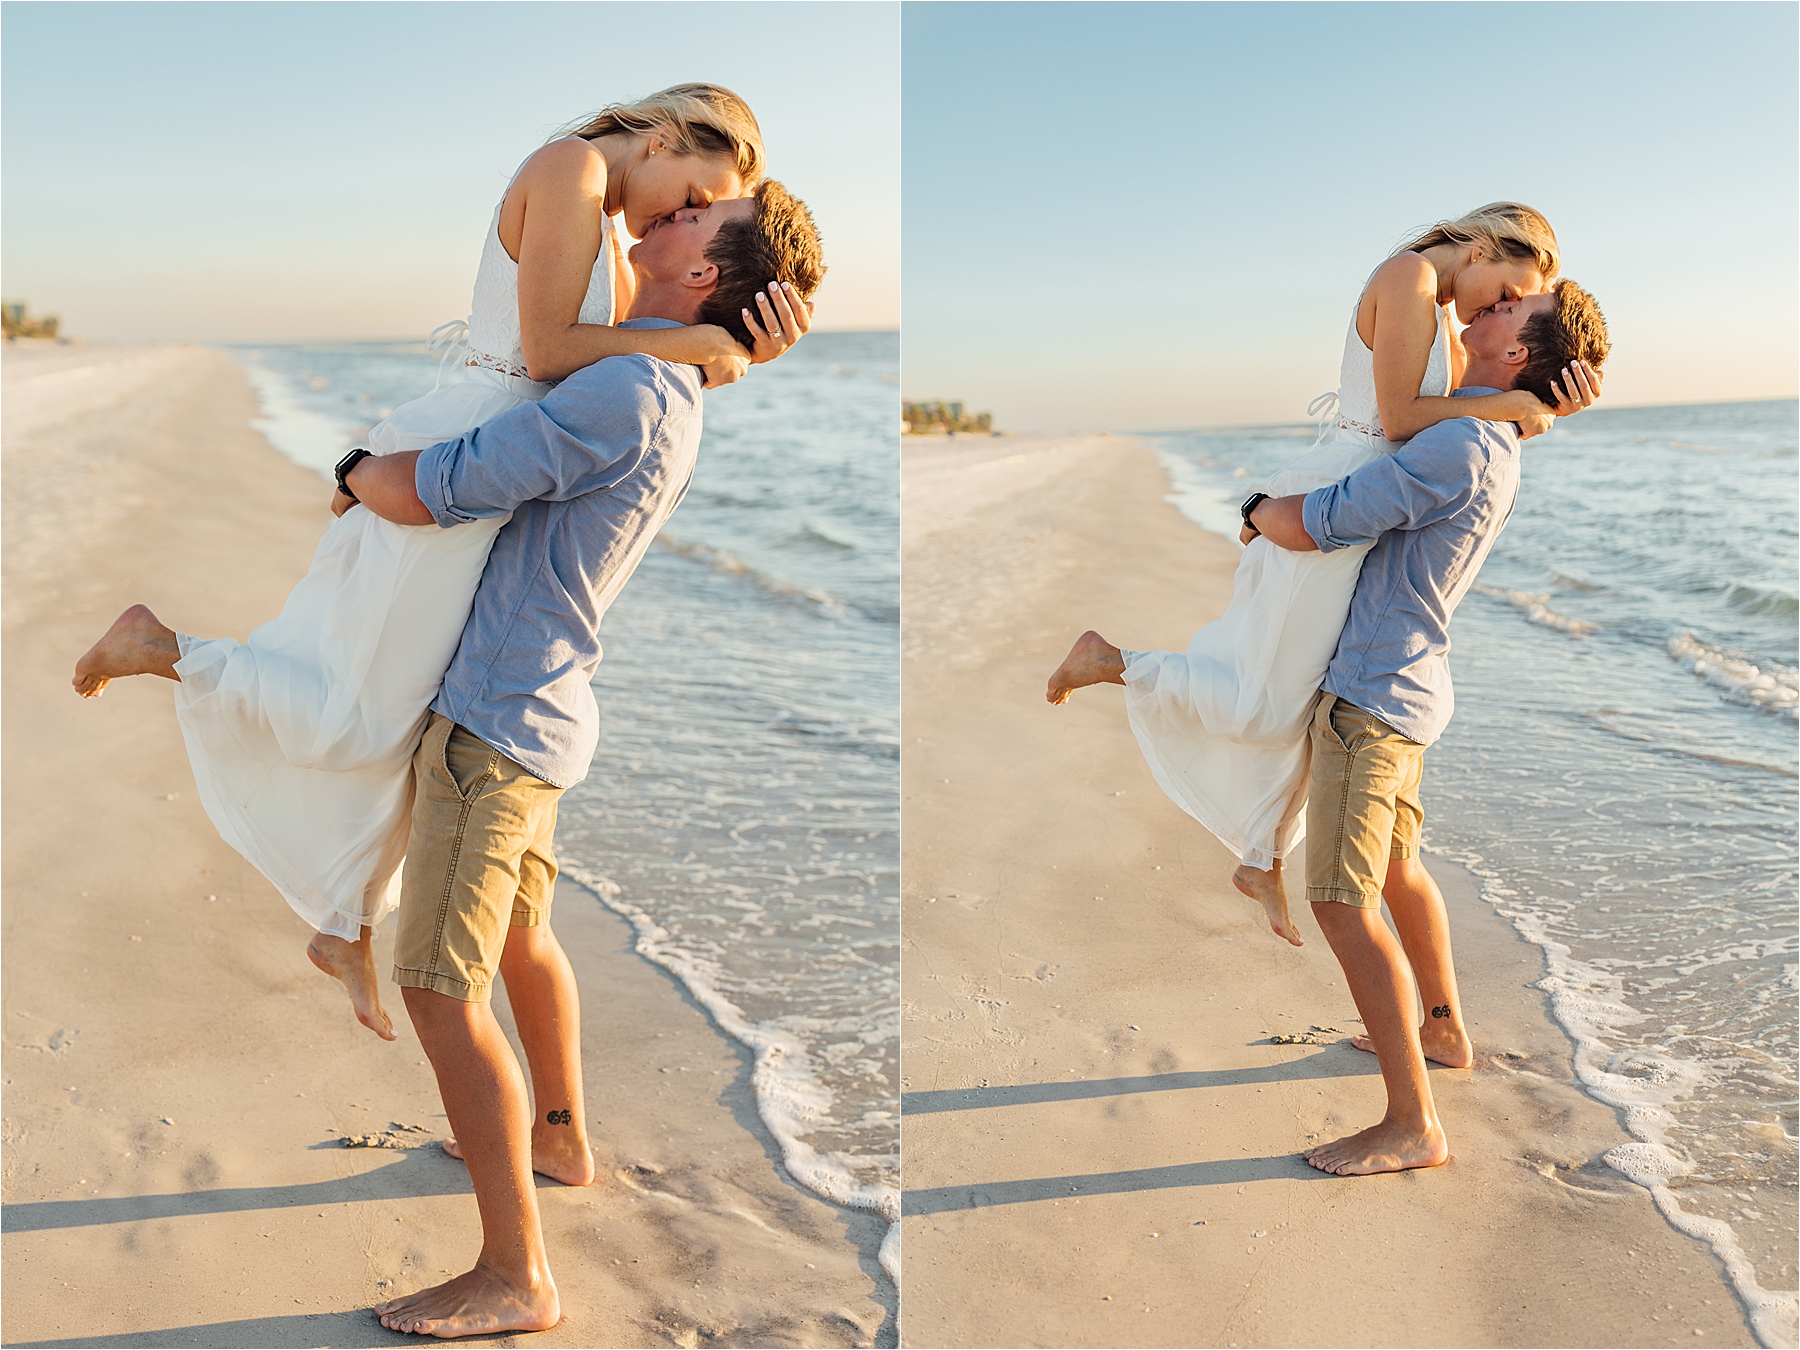 Picking her up on the beach engagement photos